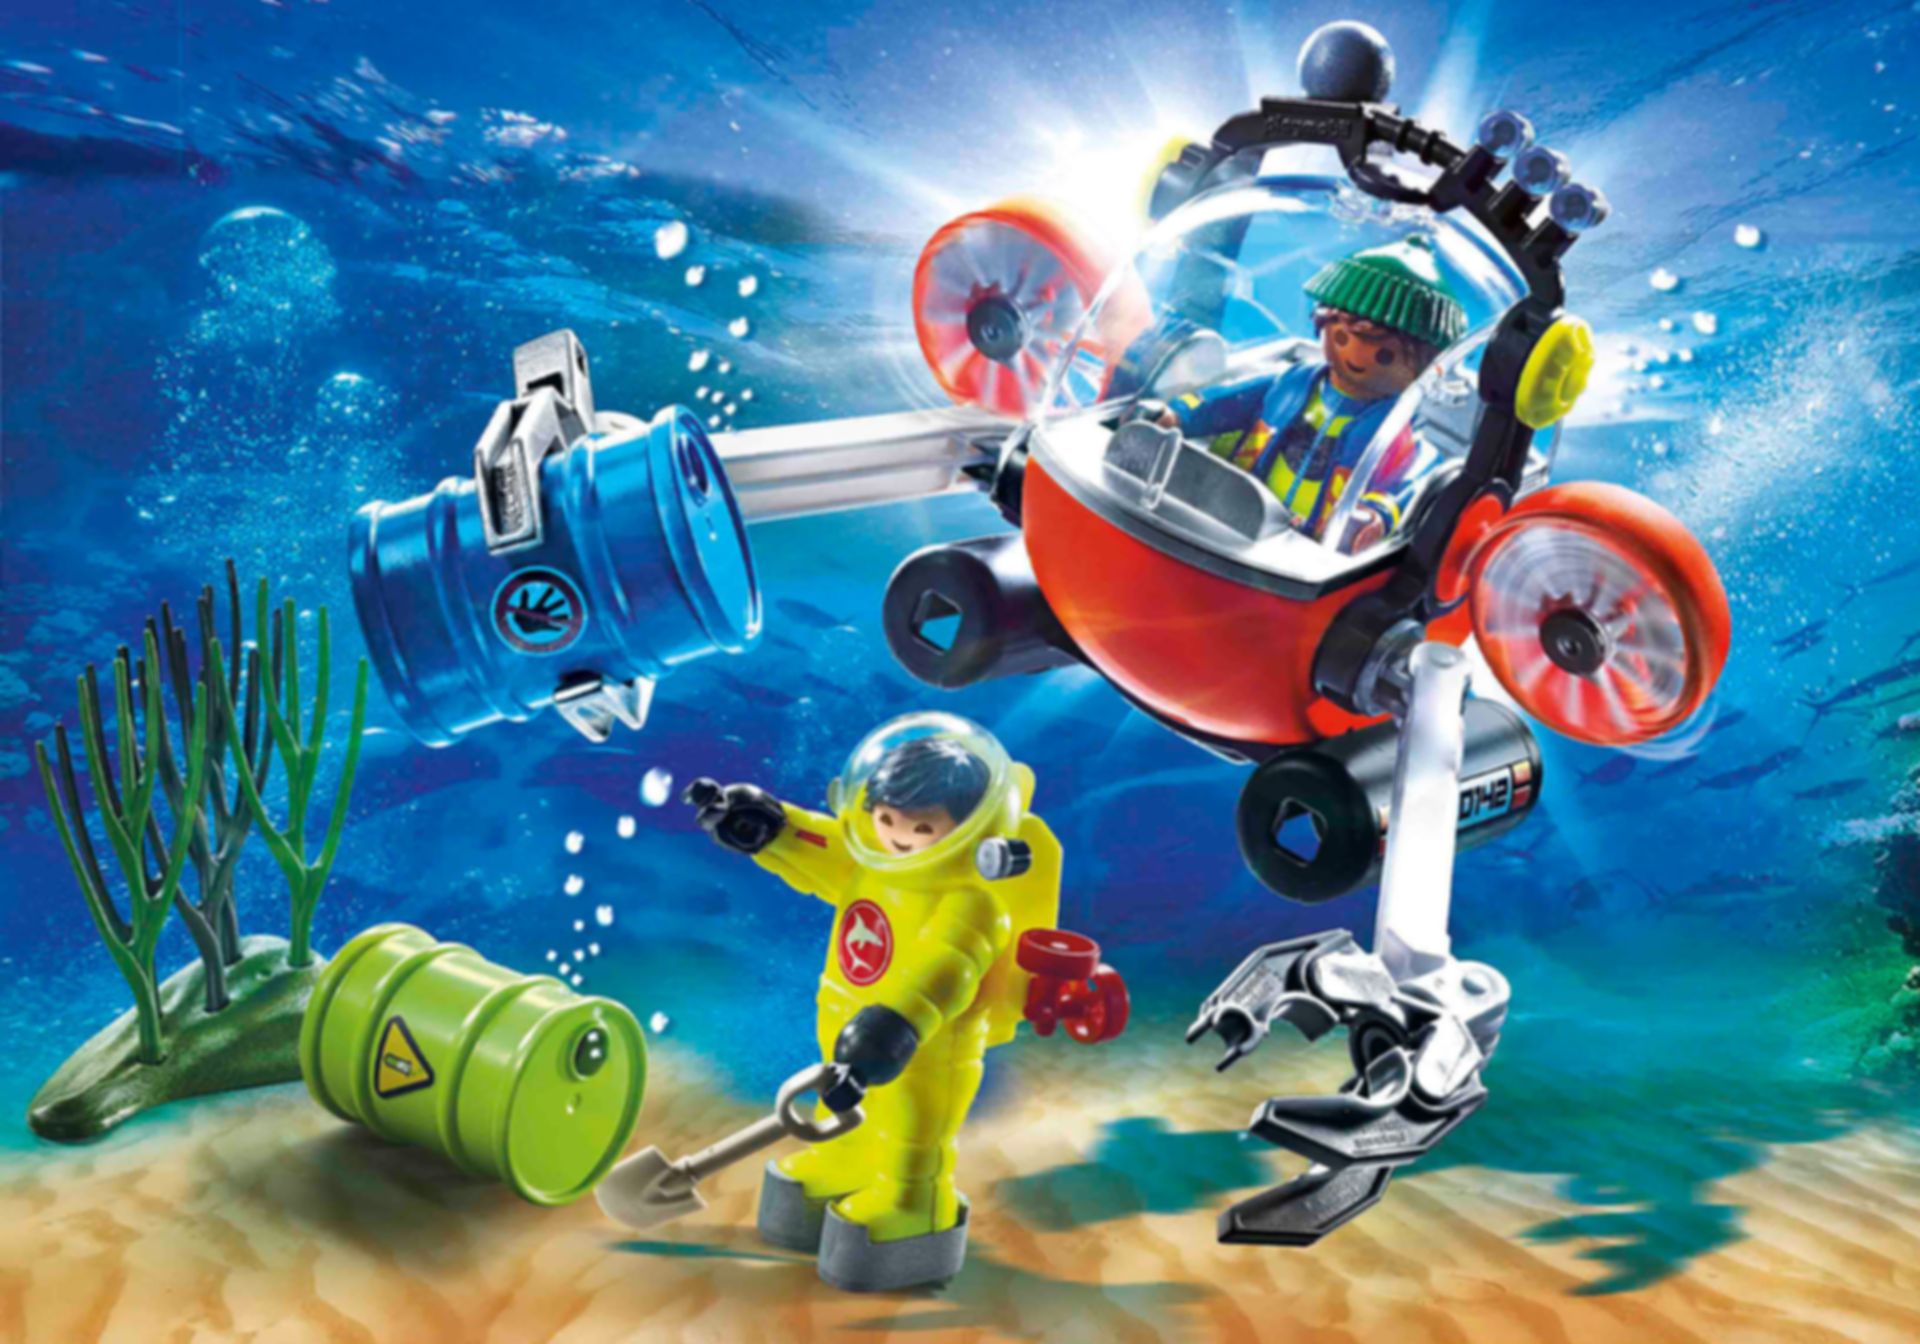 Playmobil® City Action Environmental Expedition with Dive Boat